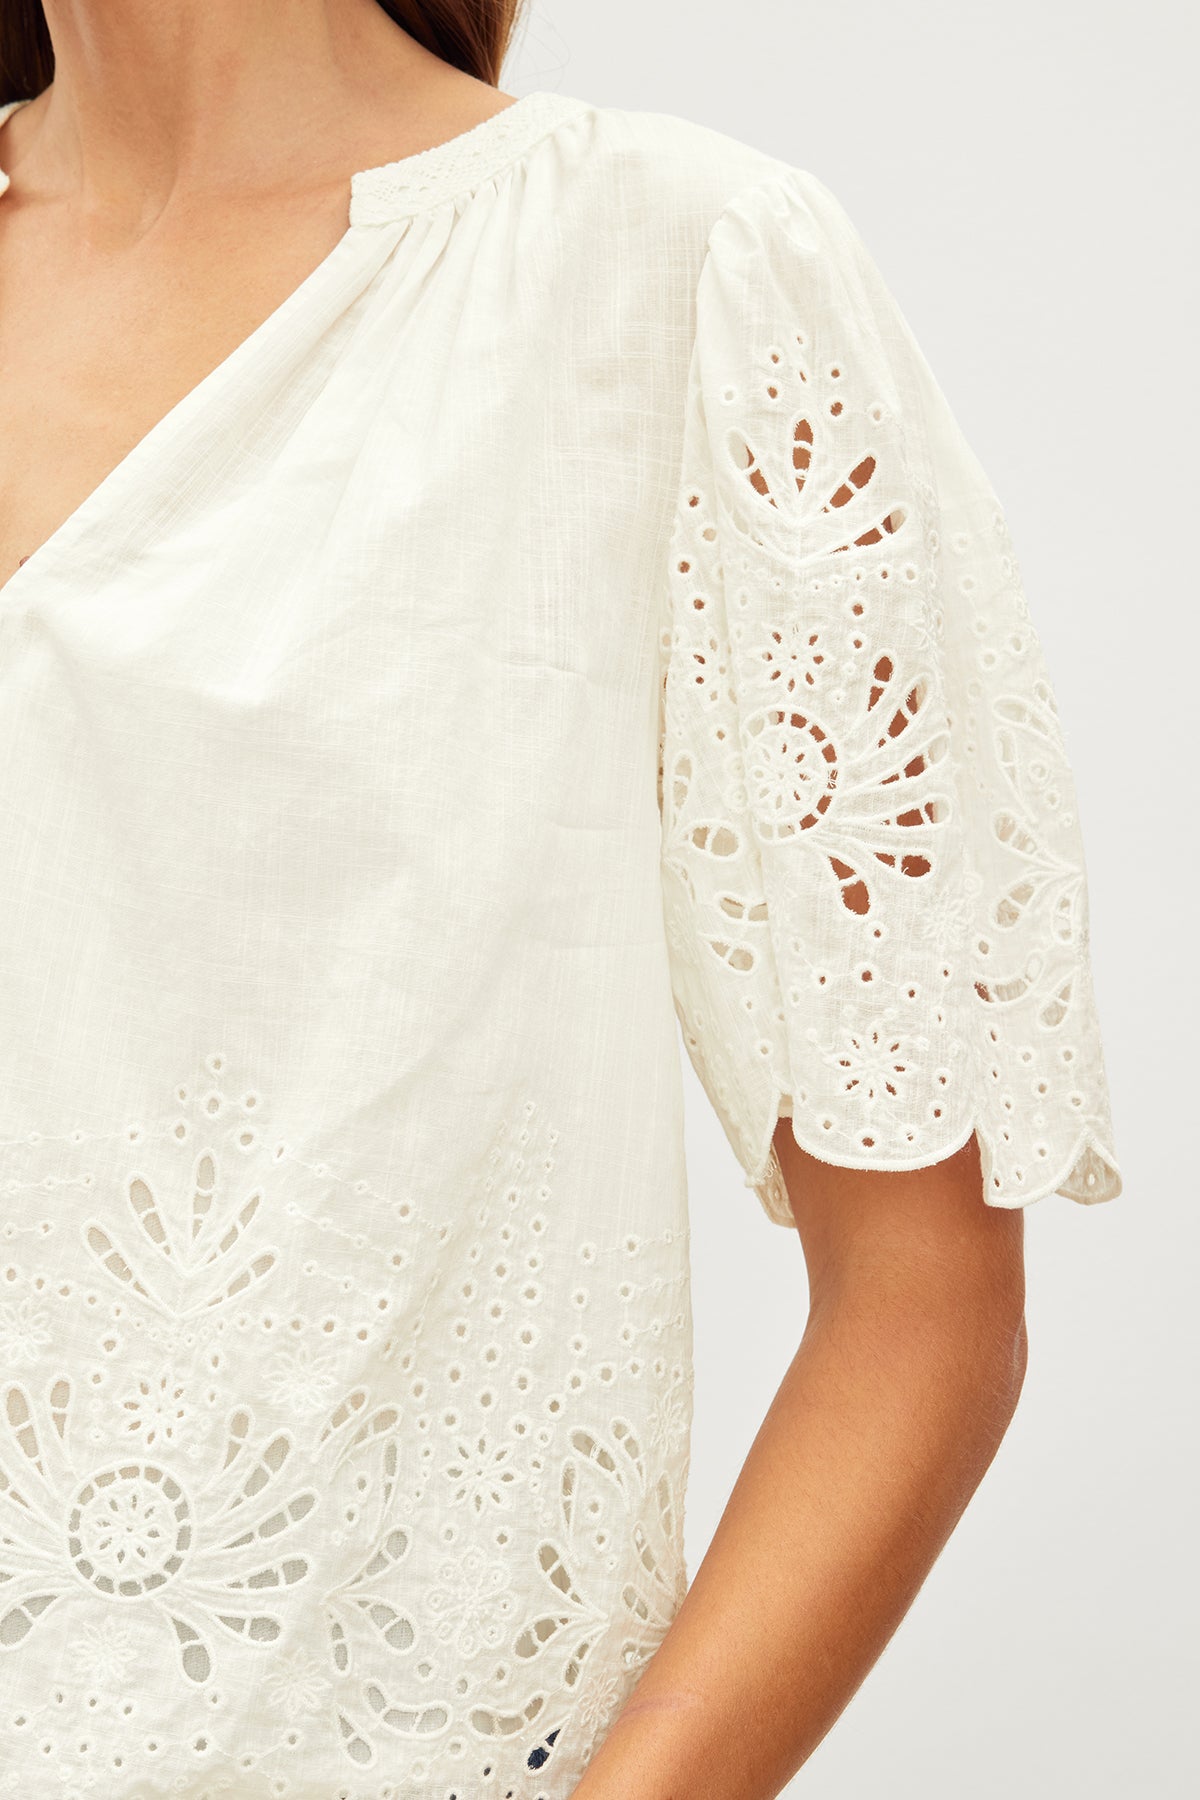 Close-up of a woman's shoulder and arm wearing a Velvet by Graham & Spencer Razi Embroidered Cotton Lace Top with cut-out patterns on the sleeve.-36783664562369